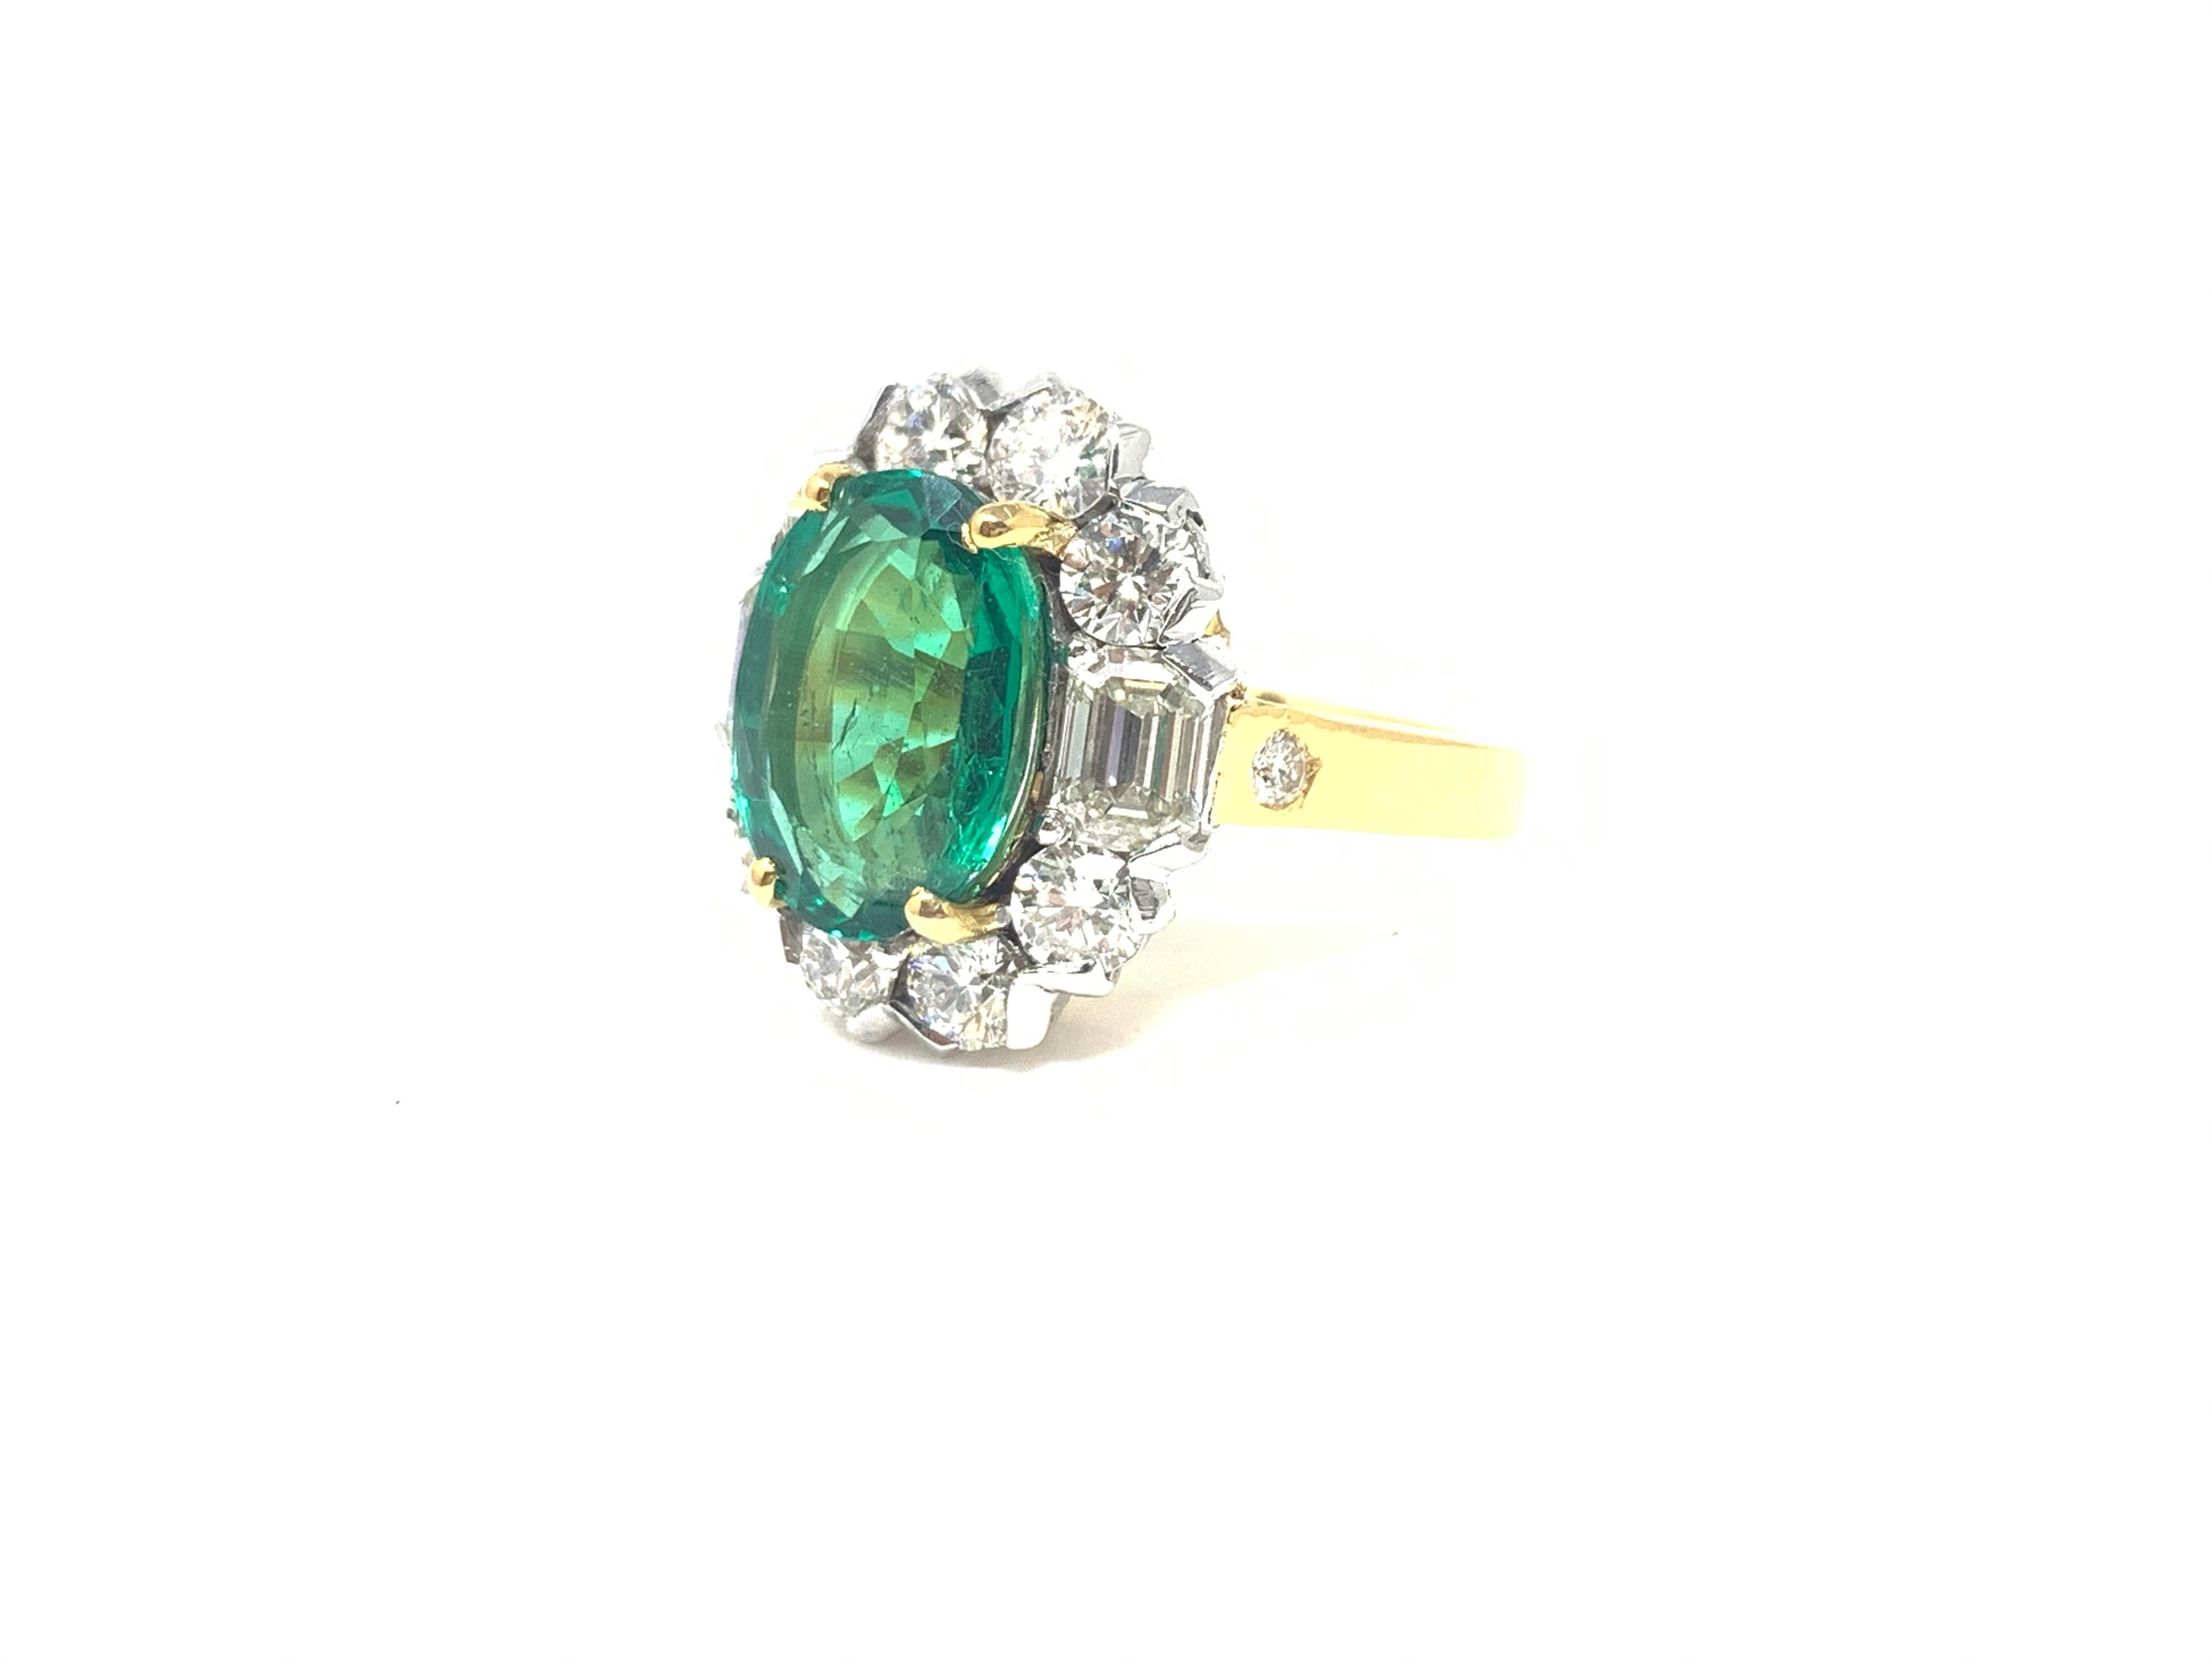 Contemporary Emerald and White Diamond Engagement Ring in 18 Karat Yellow Gold